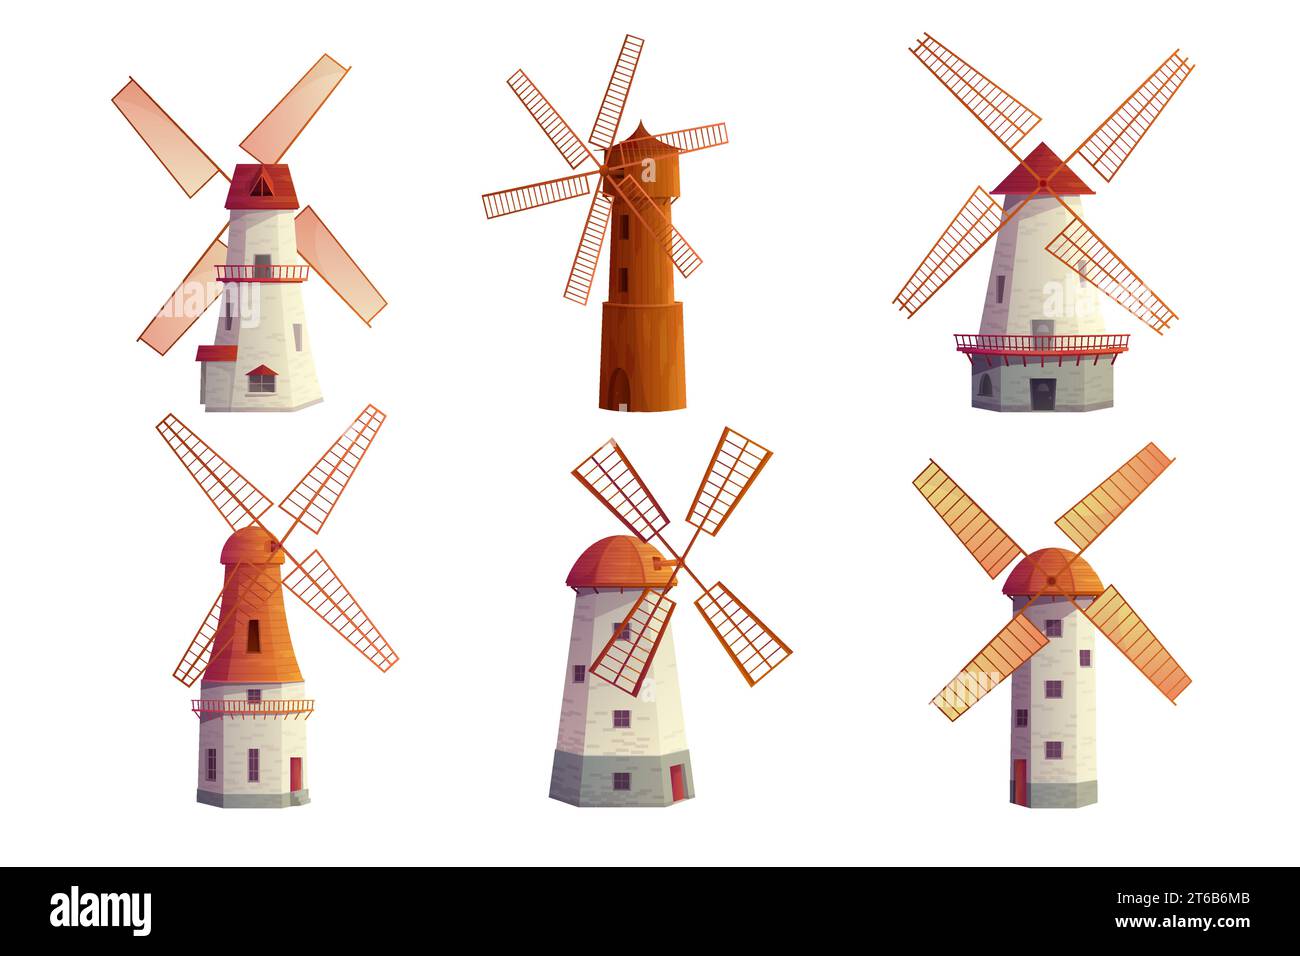 Old windmills set vector illustration. Cartoon isolated vintage farm stone and wooden tower mills to grind wheat flour with wind, collection of different Dutch farm buildings with fans for grinding Stock Vector